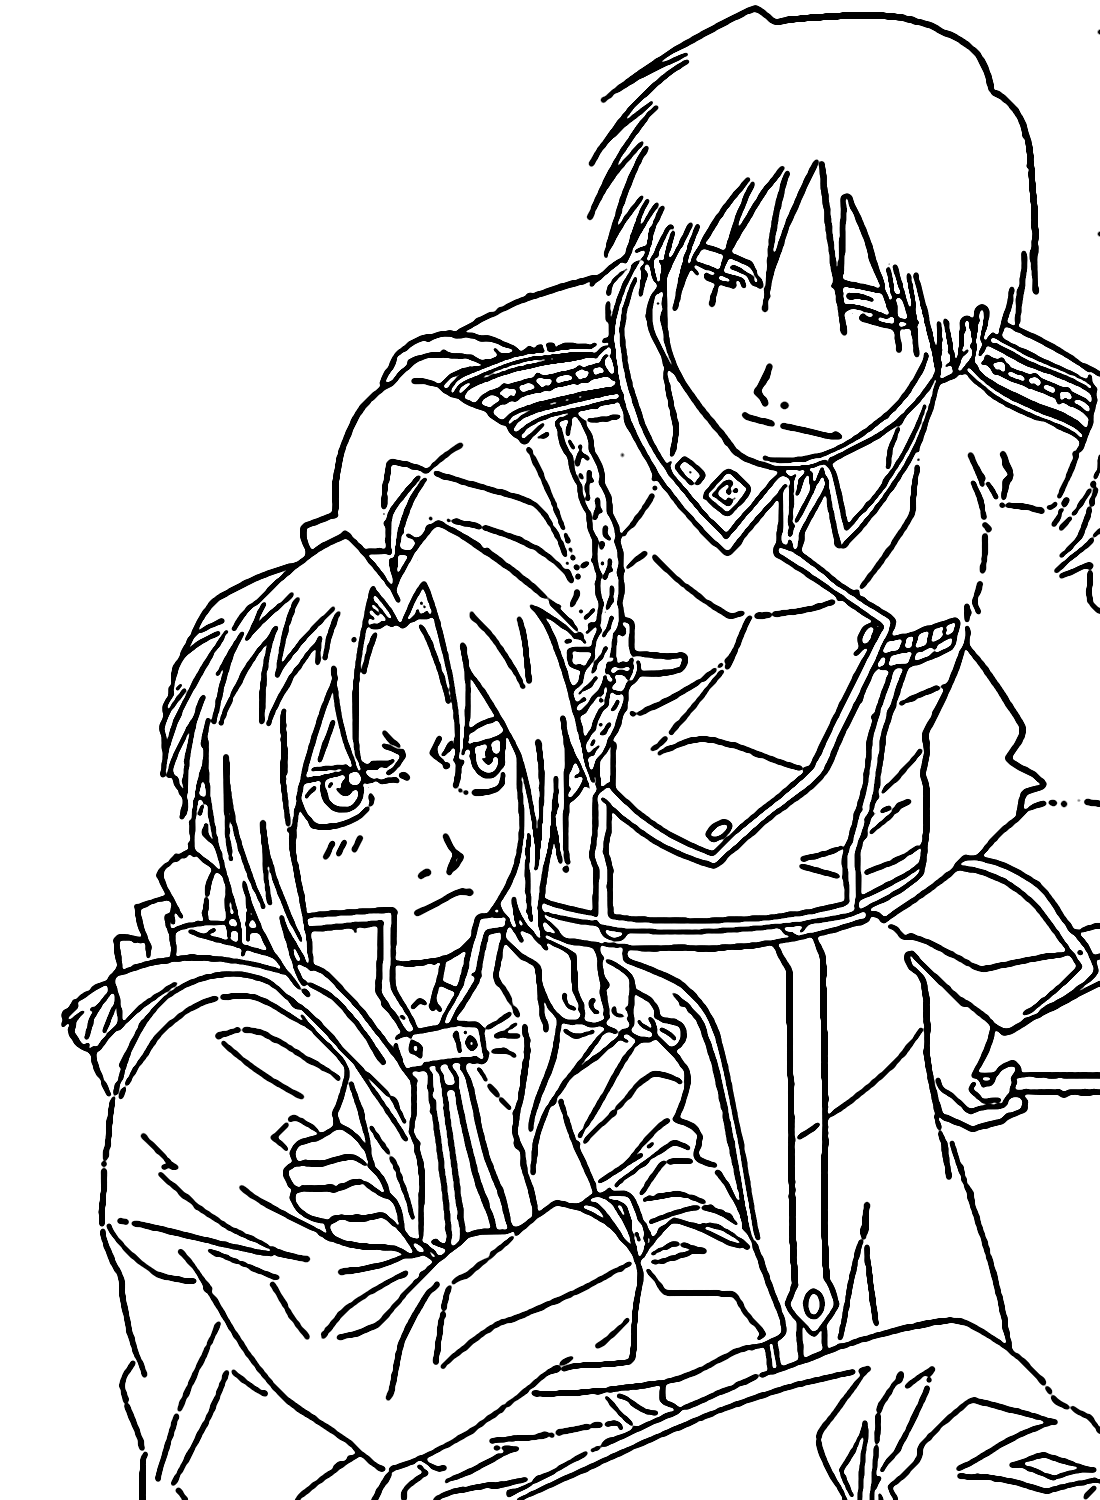 Edward Elric and Roy Mustang from Edward Elric